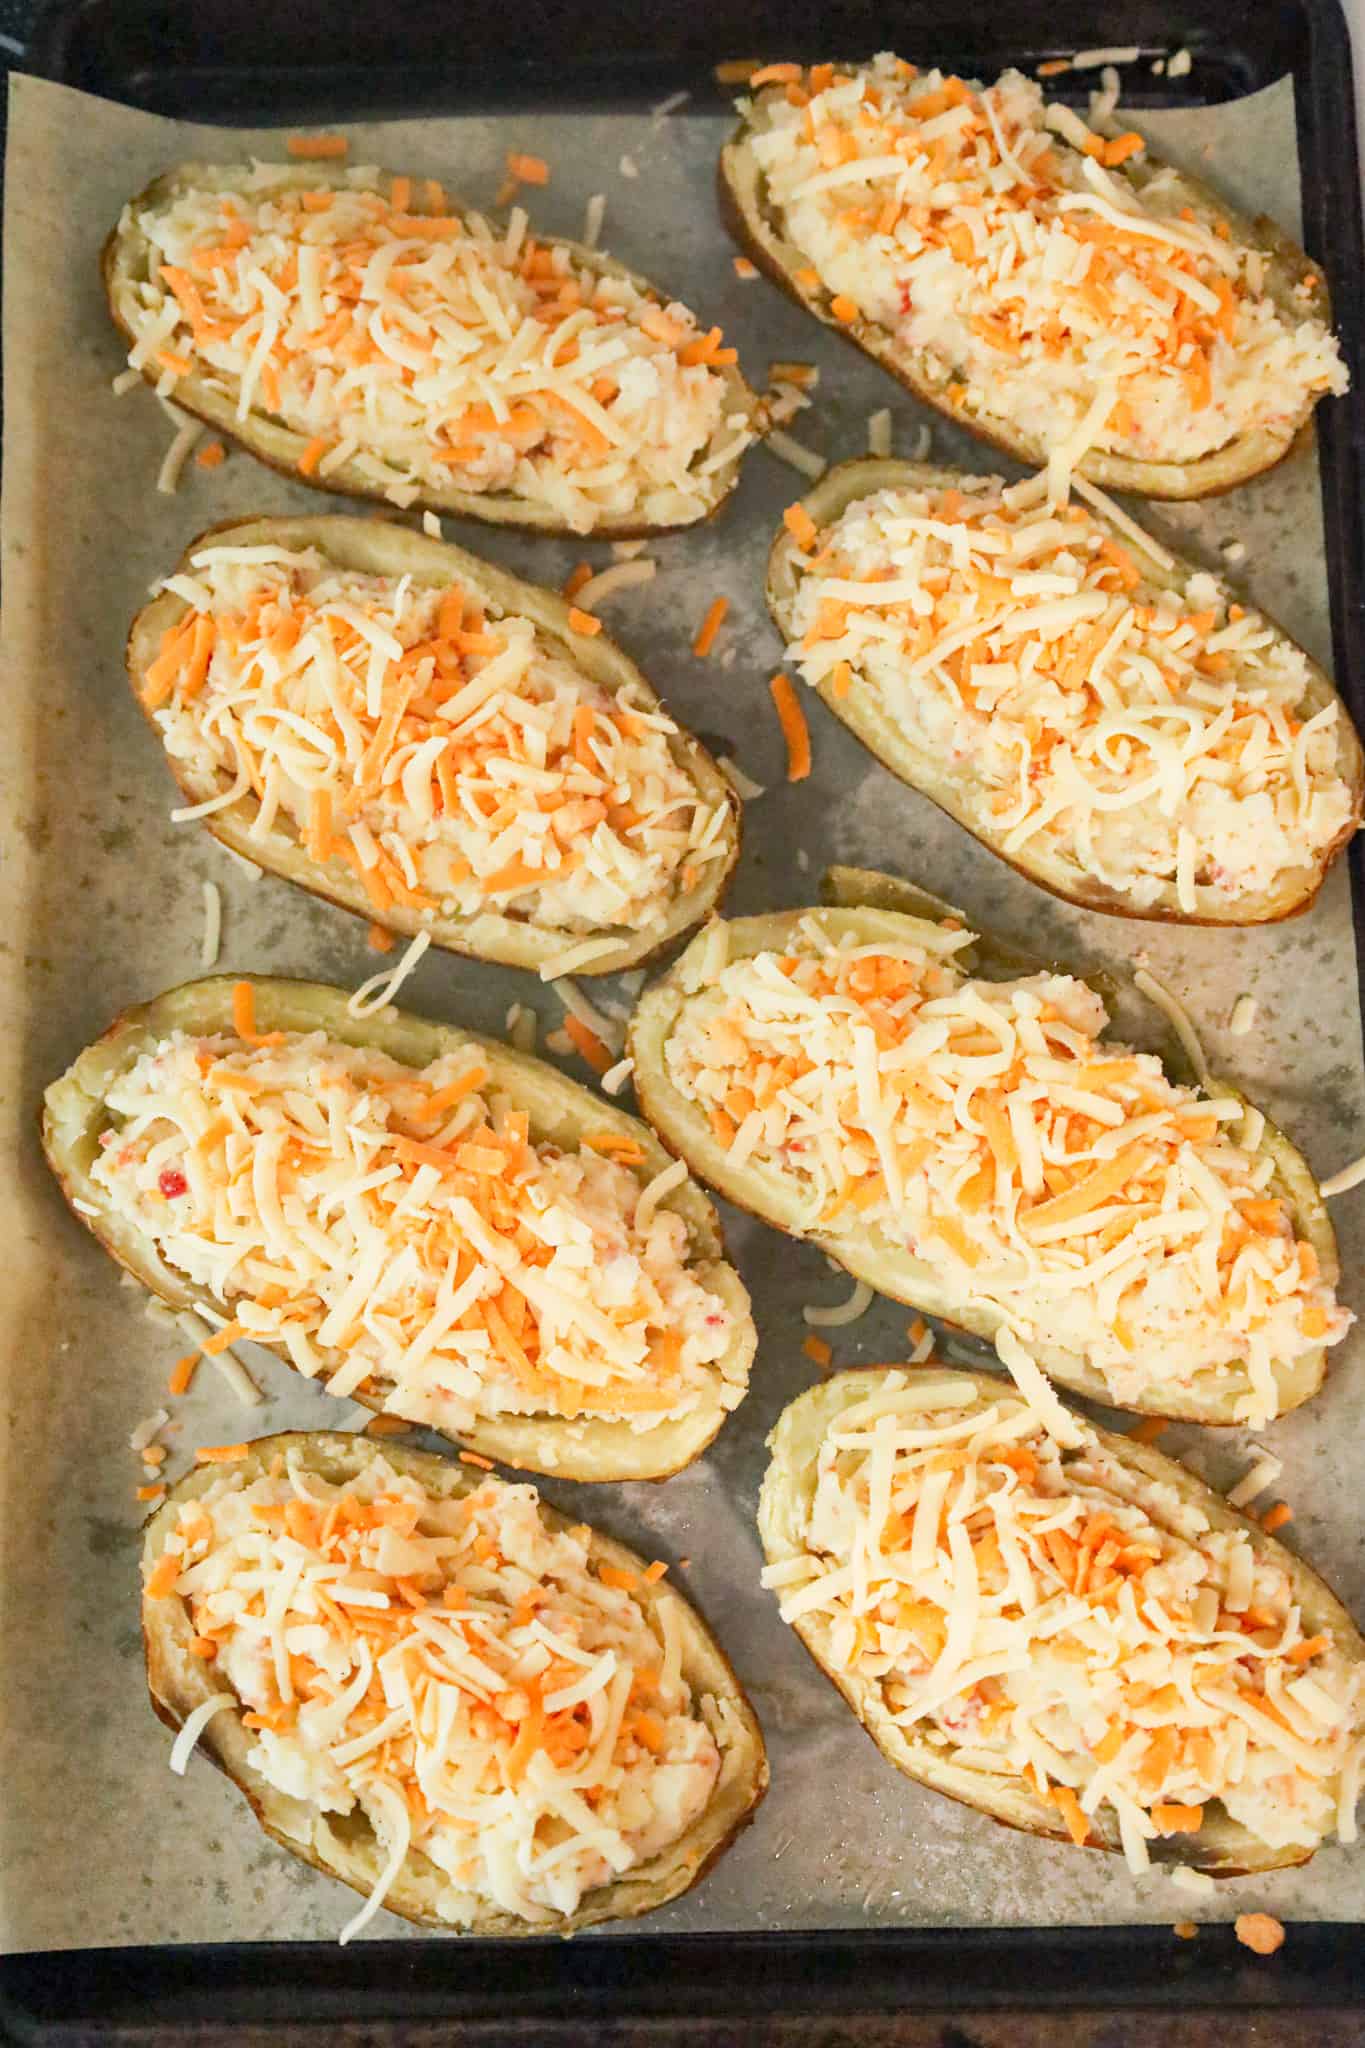 shredded cheese on top of mashed potato in potato skins